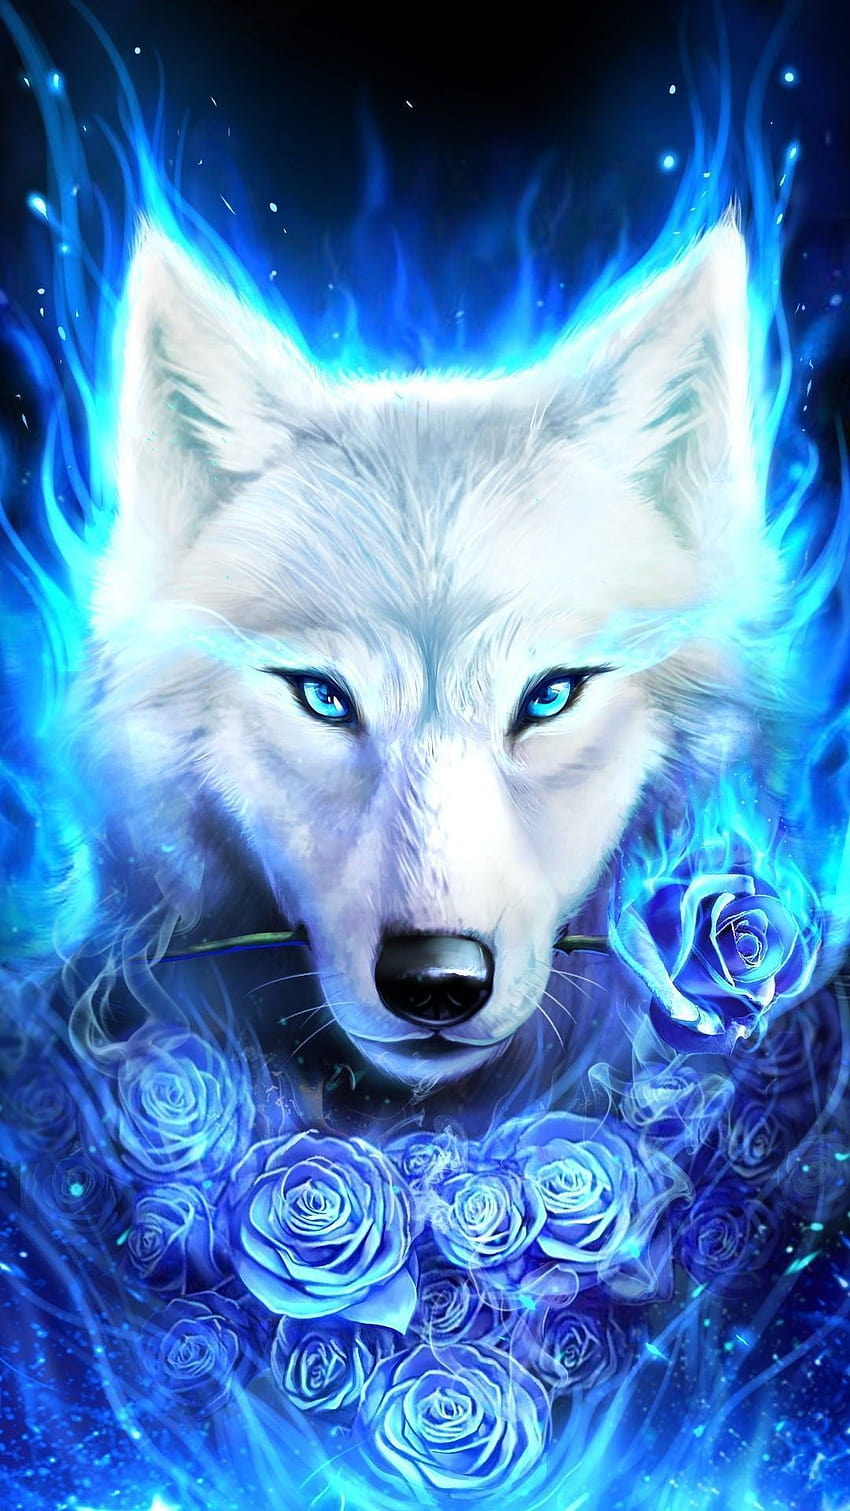 Epic Wolf Backgrounds For Iphone on Hupages, if you like it dont forget save it or…, fire and ice wolves HD phone wallpaper